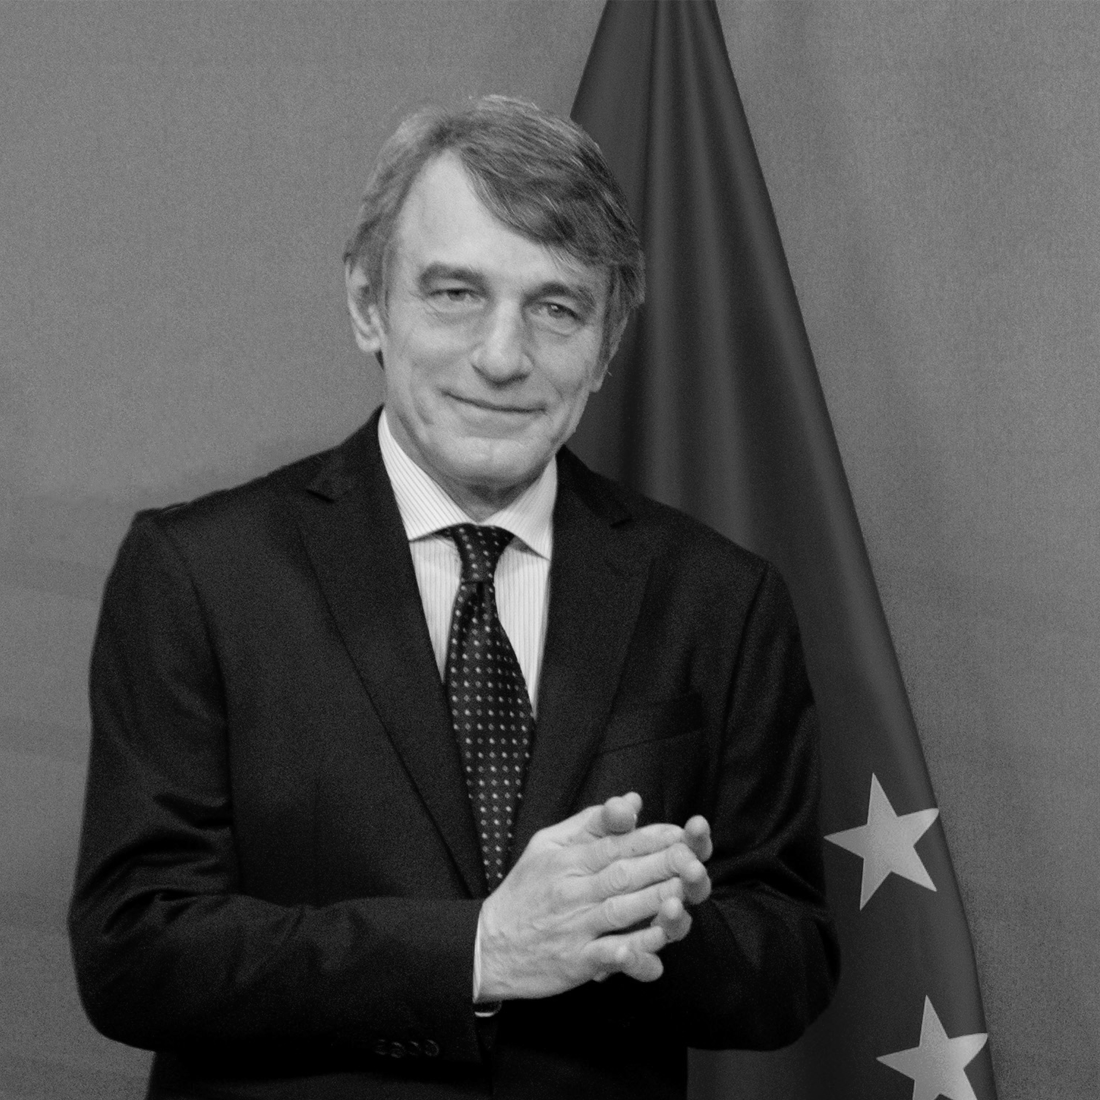 We are deeply saddened by the terrible loss of a great European and proud Italian. David Sassoli was a compassionate journalist, an outstanding President of the European Parliament. Our thoughts are with his family. Riposa in pace.